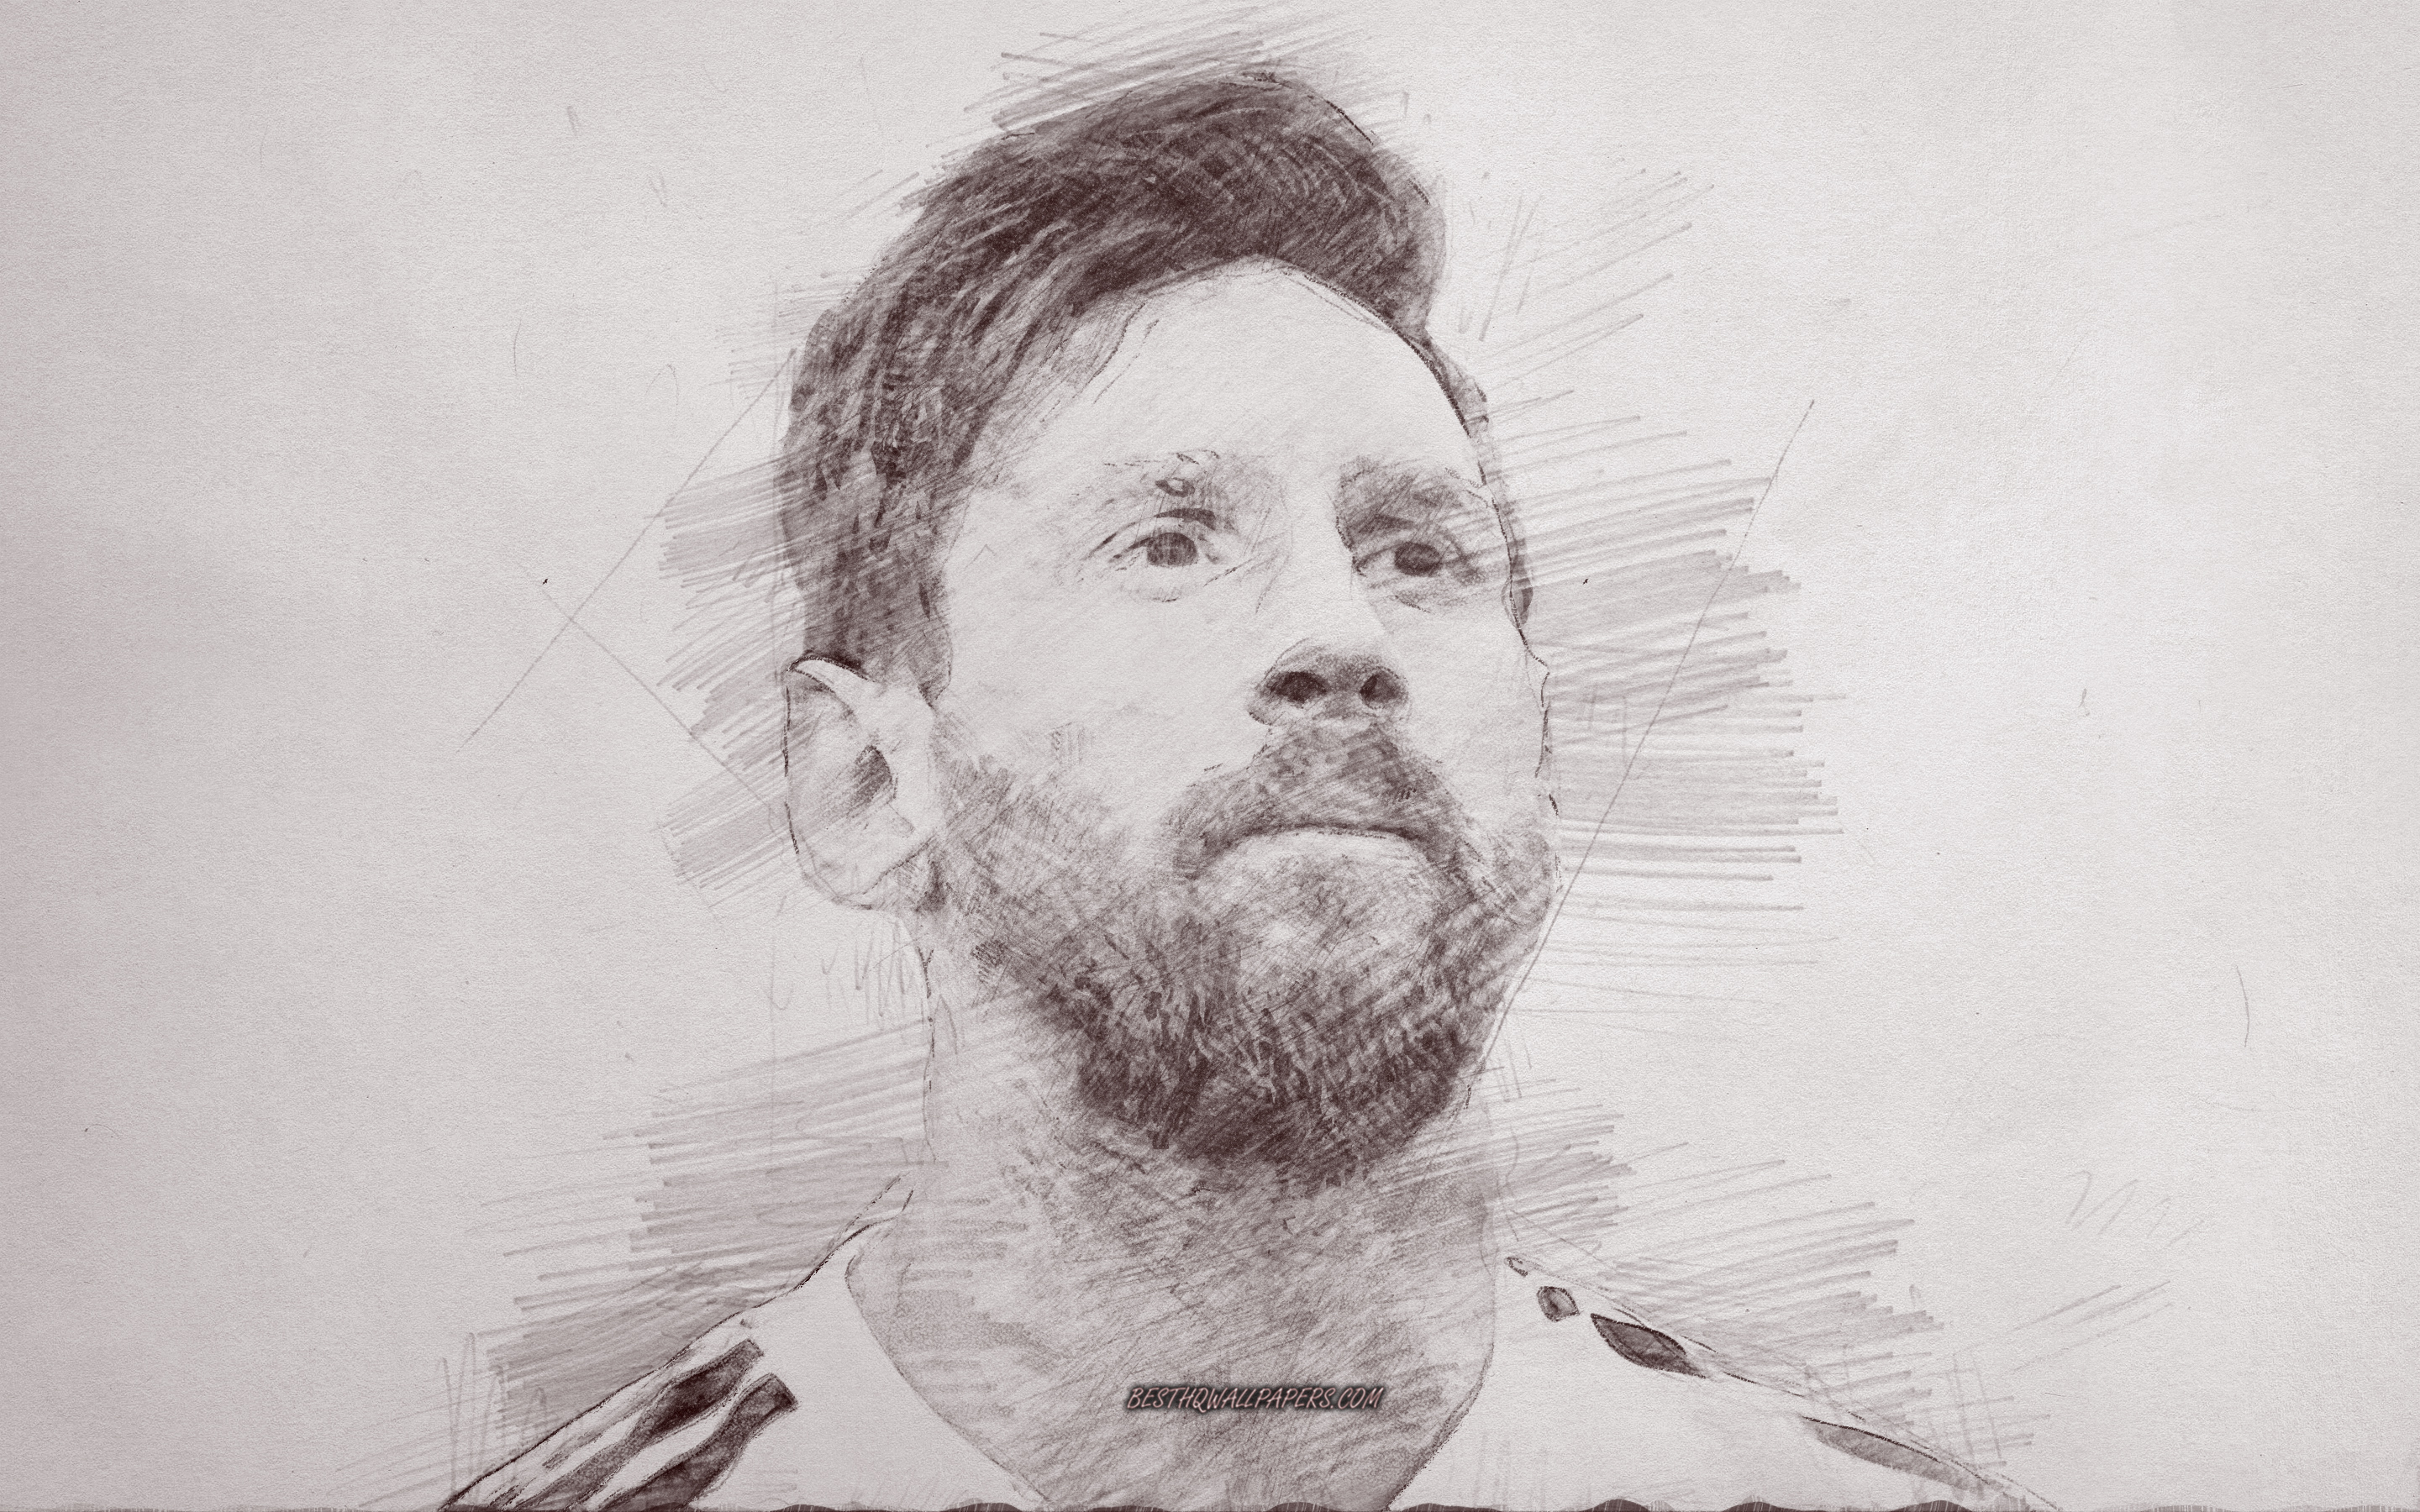 Download wallpaper Lionel Messi, portrait, pencil drawing, argentinian soccer player, Argentina national football team, face, drawing on paper, football, Messi portrait for desktop with resolution 2880x1800. High Quality HD picture wallpaper